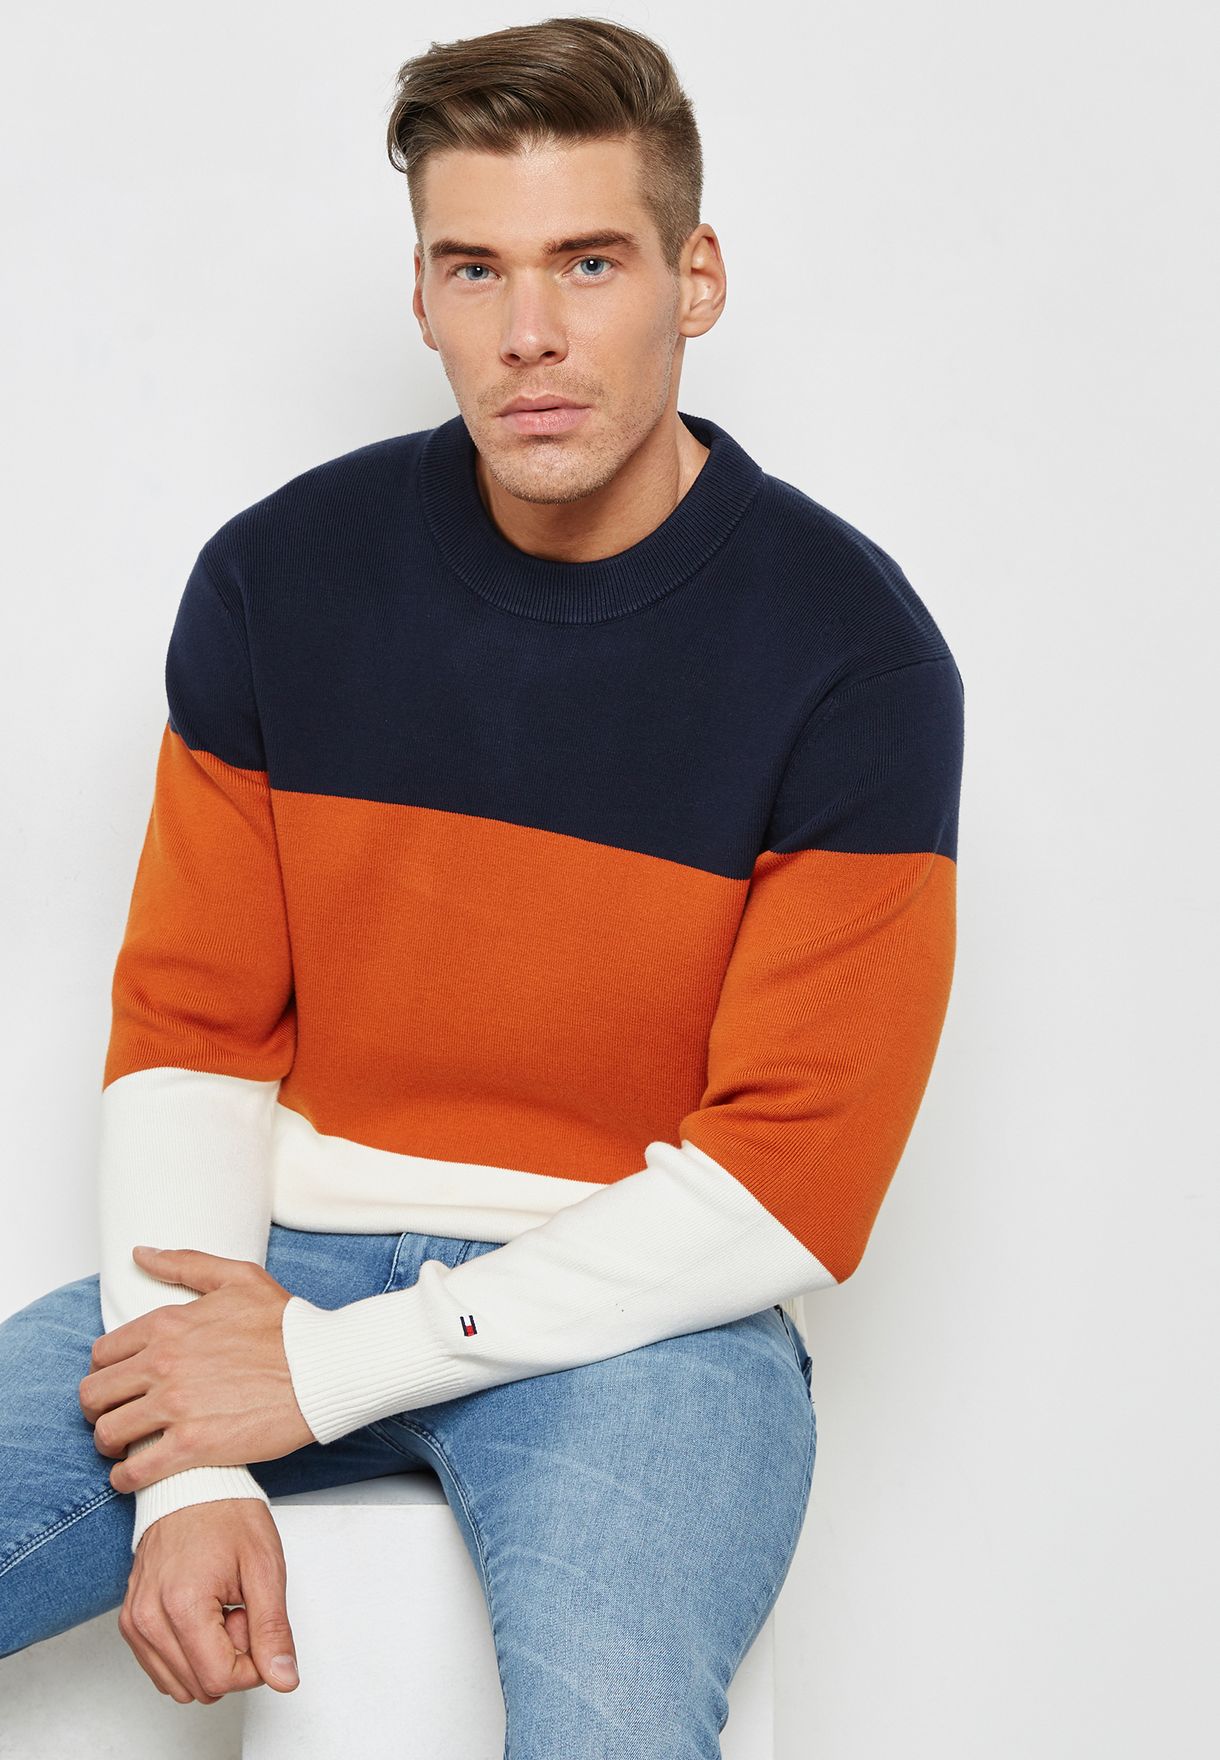 tommy hilfiger multicolor sweater